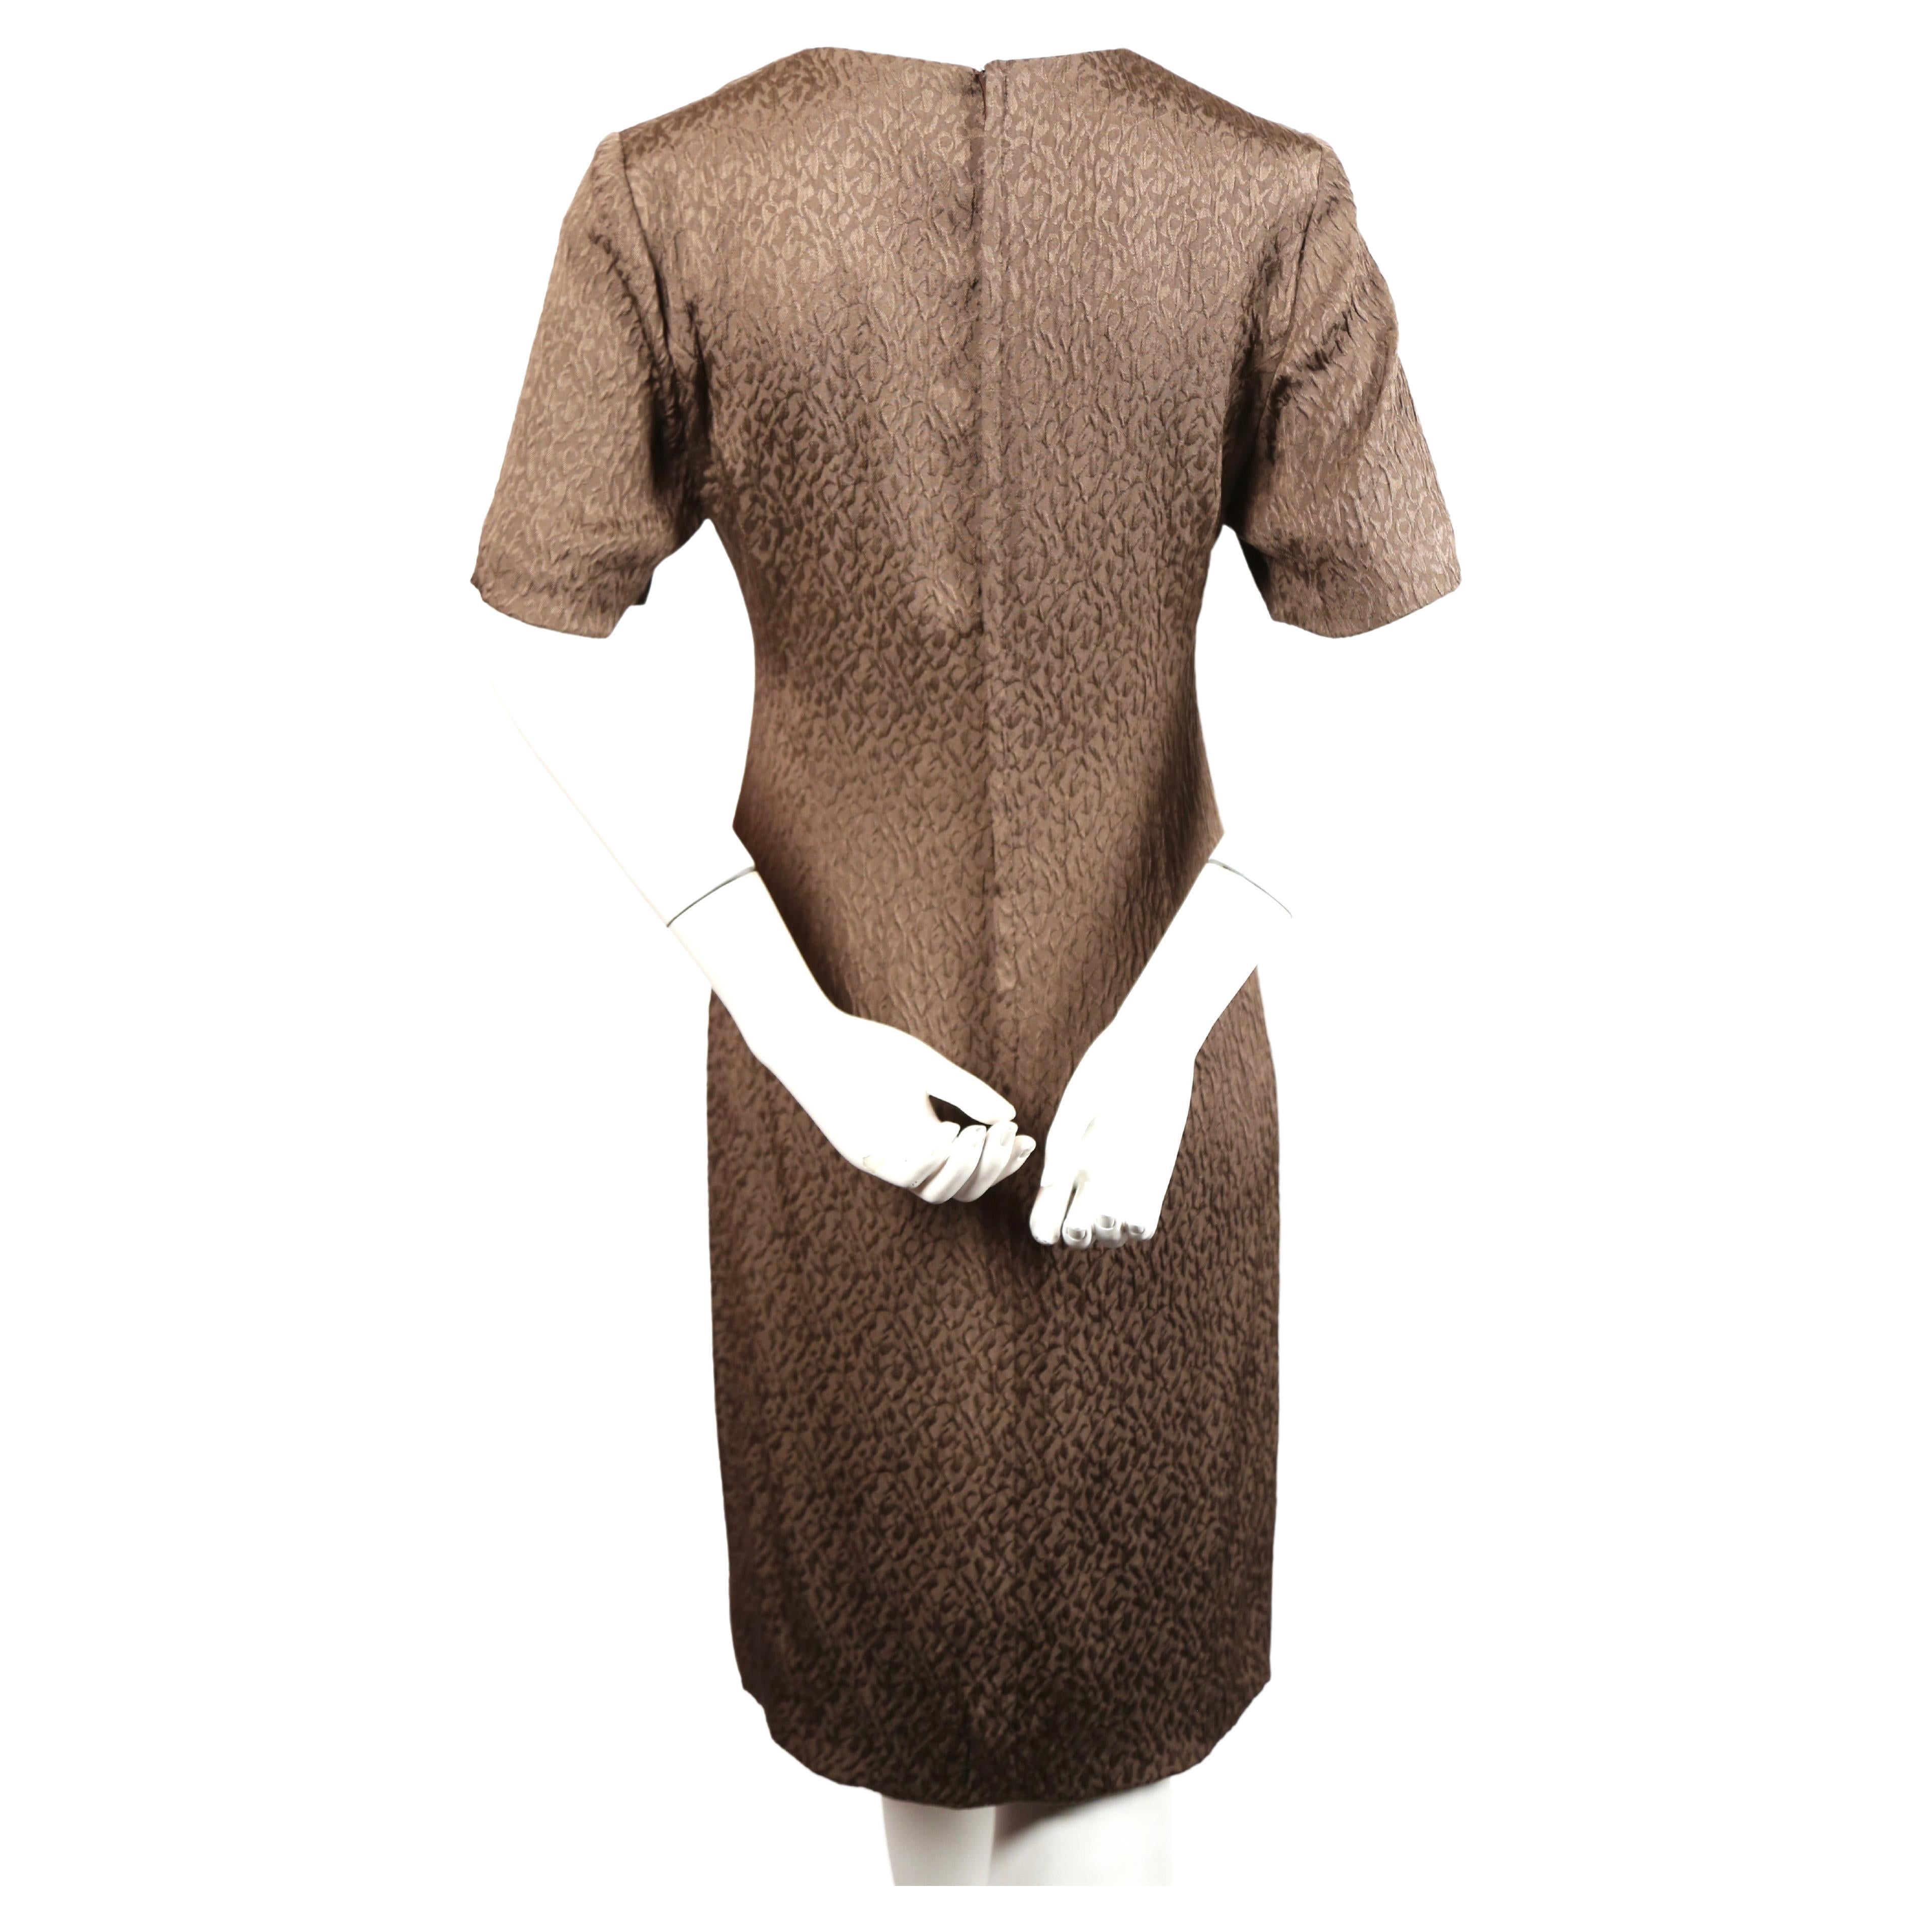 Women's 1970's ANDRE LAUG silk dress with gathered waist For Sale